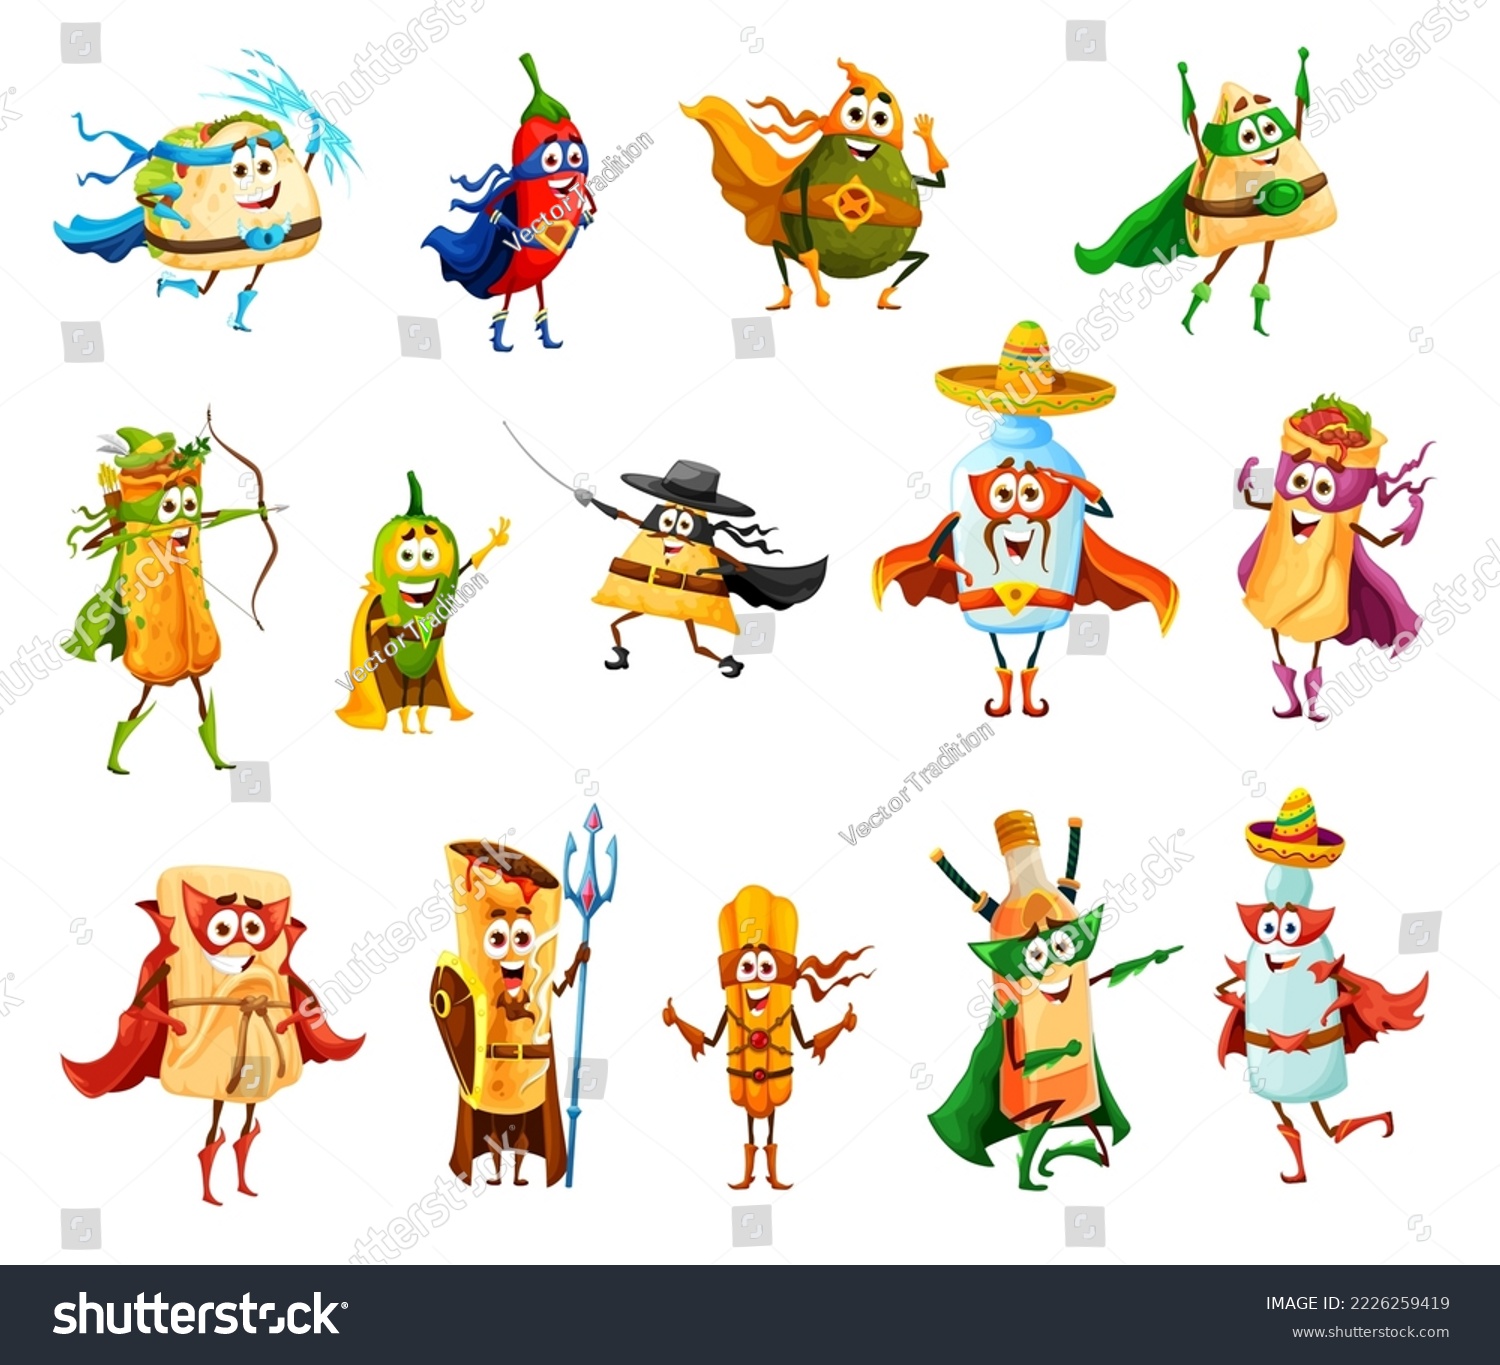 SVG of Tex mex mexican food superhero and defender characters. Isolated vector tacos, burrito, chili pepper and nachos, enchiladas, jalapeno, tamale and chimichanga with tequila, churros, mezcal and pulque svg